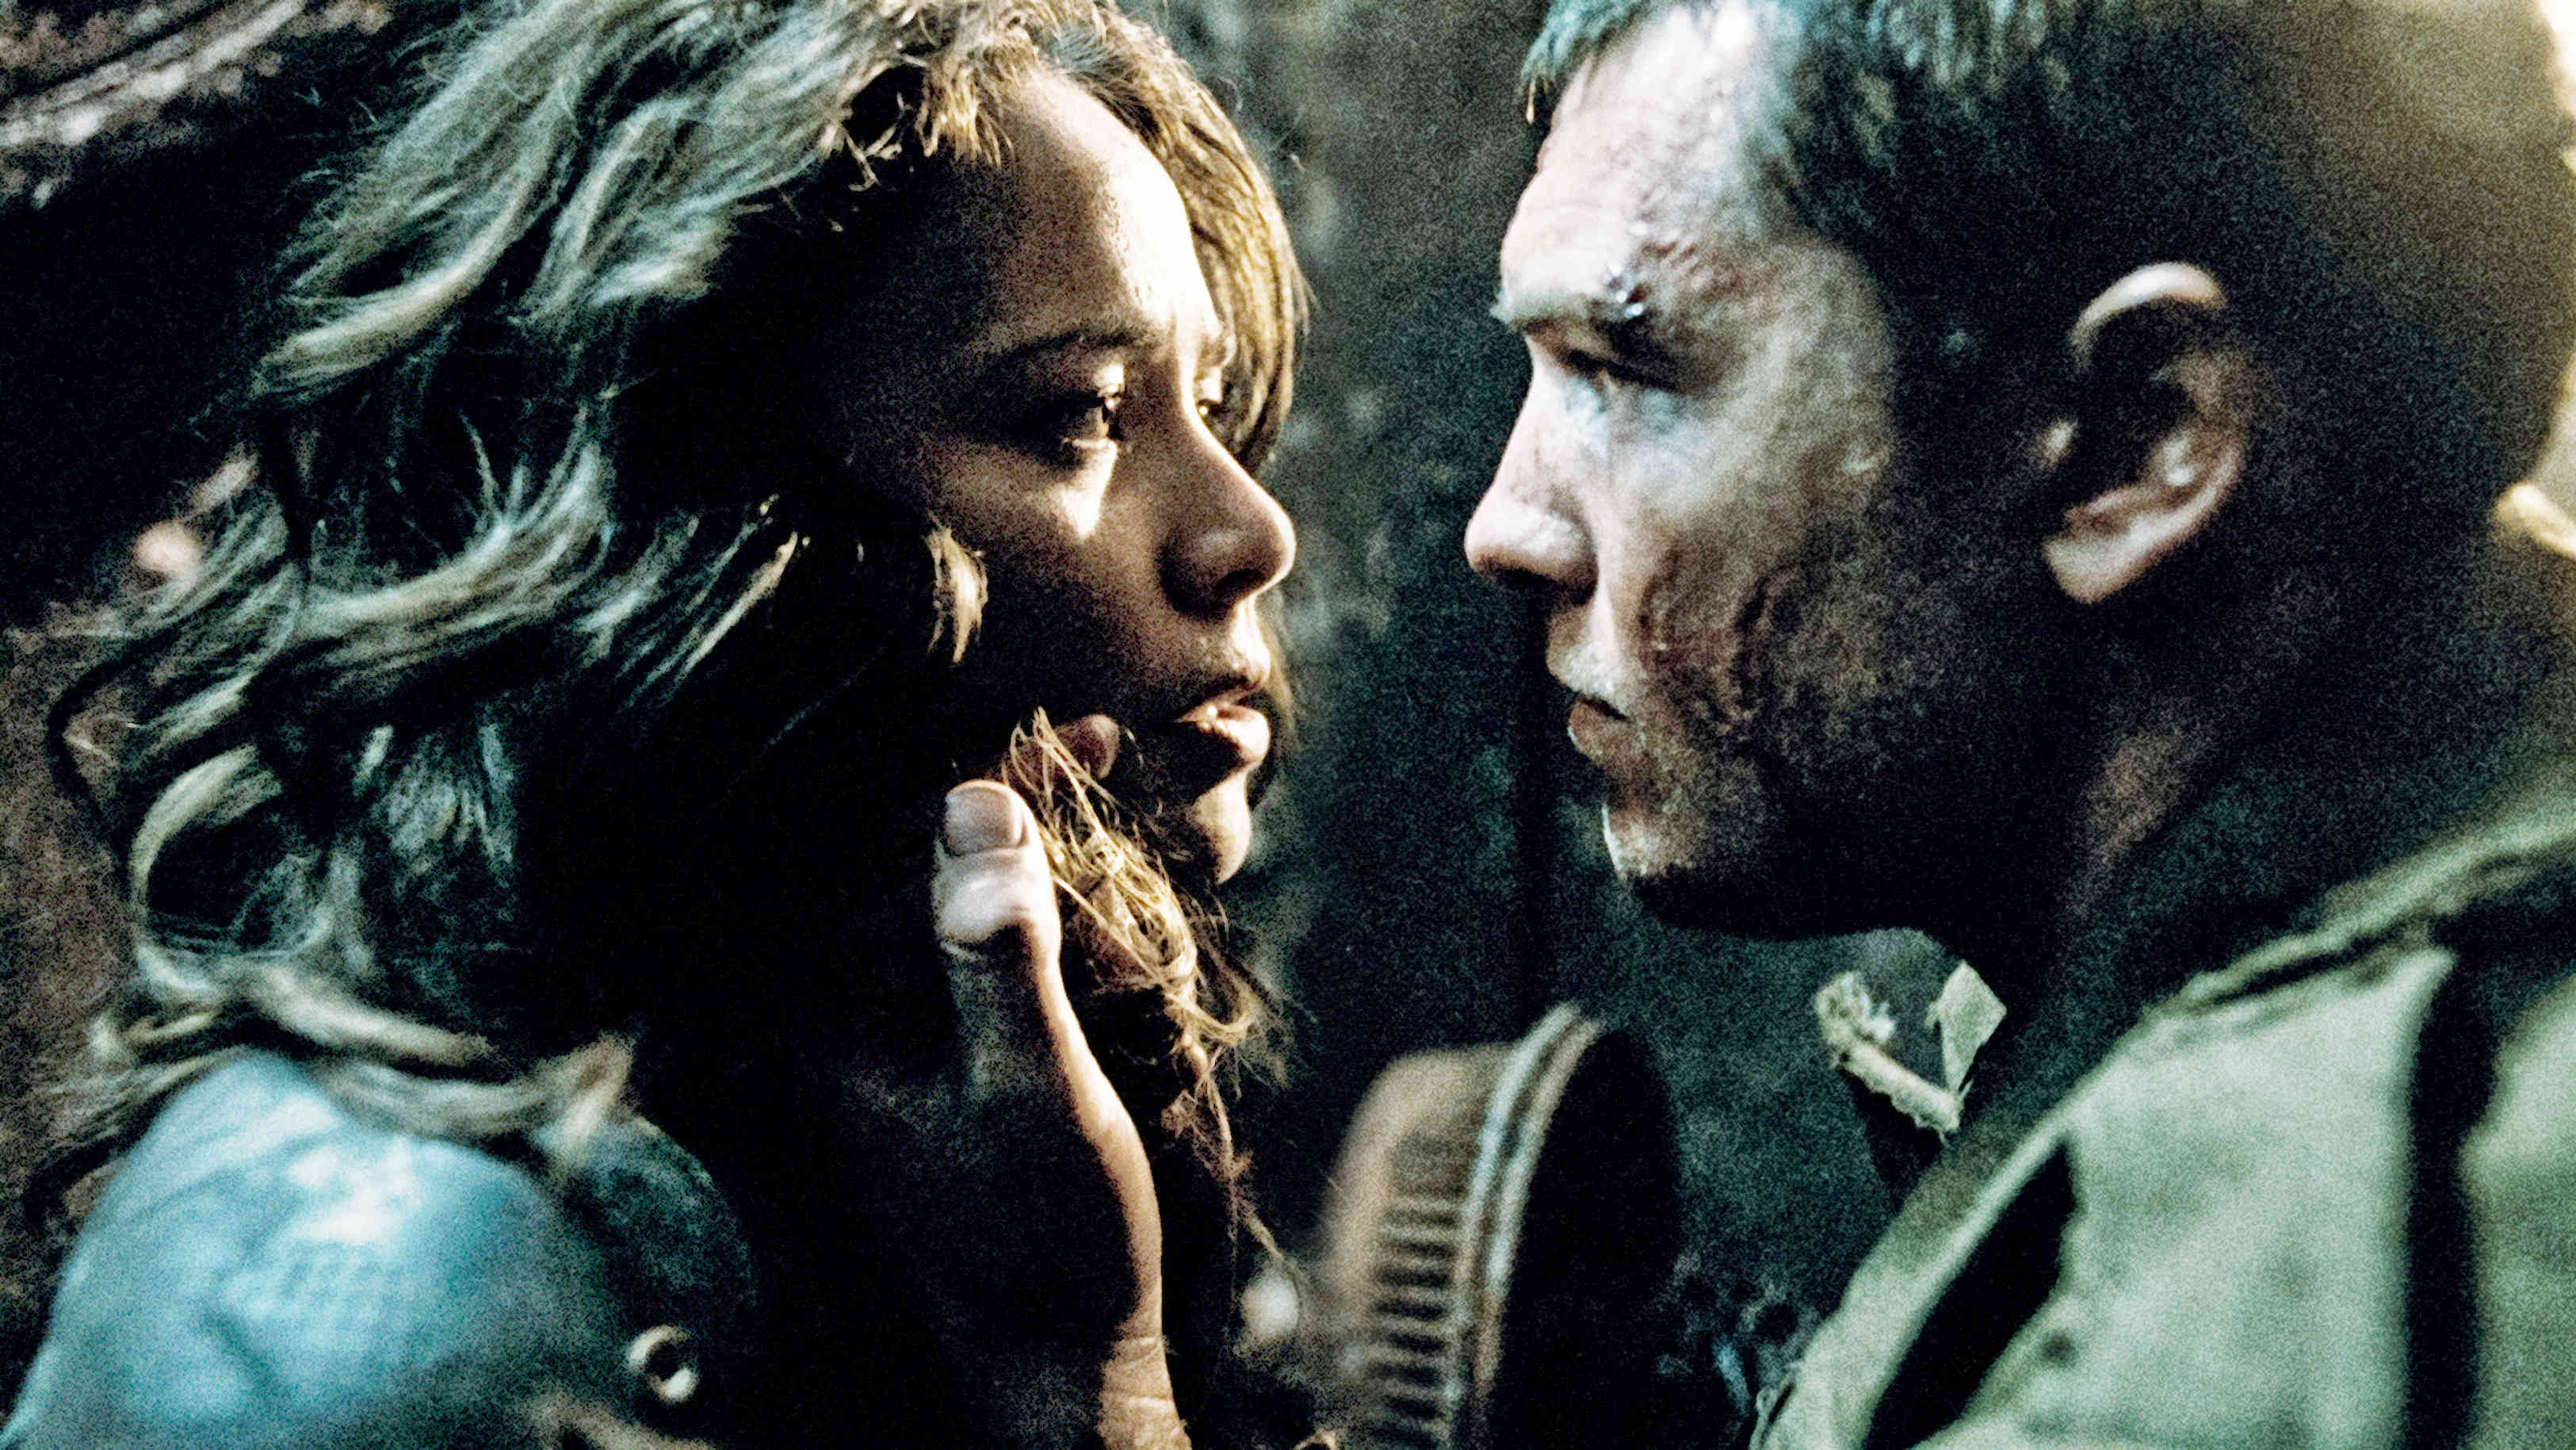 Moon Bloodgood stars as Blair Williams and Sam Worthington stars as Marcus Wright in Warner Bros. Pictures' Terminator Salvation (2009)